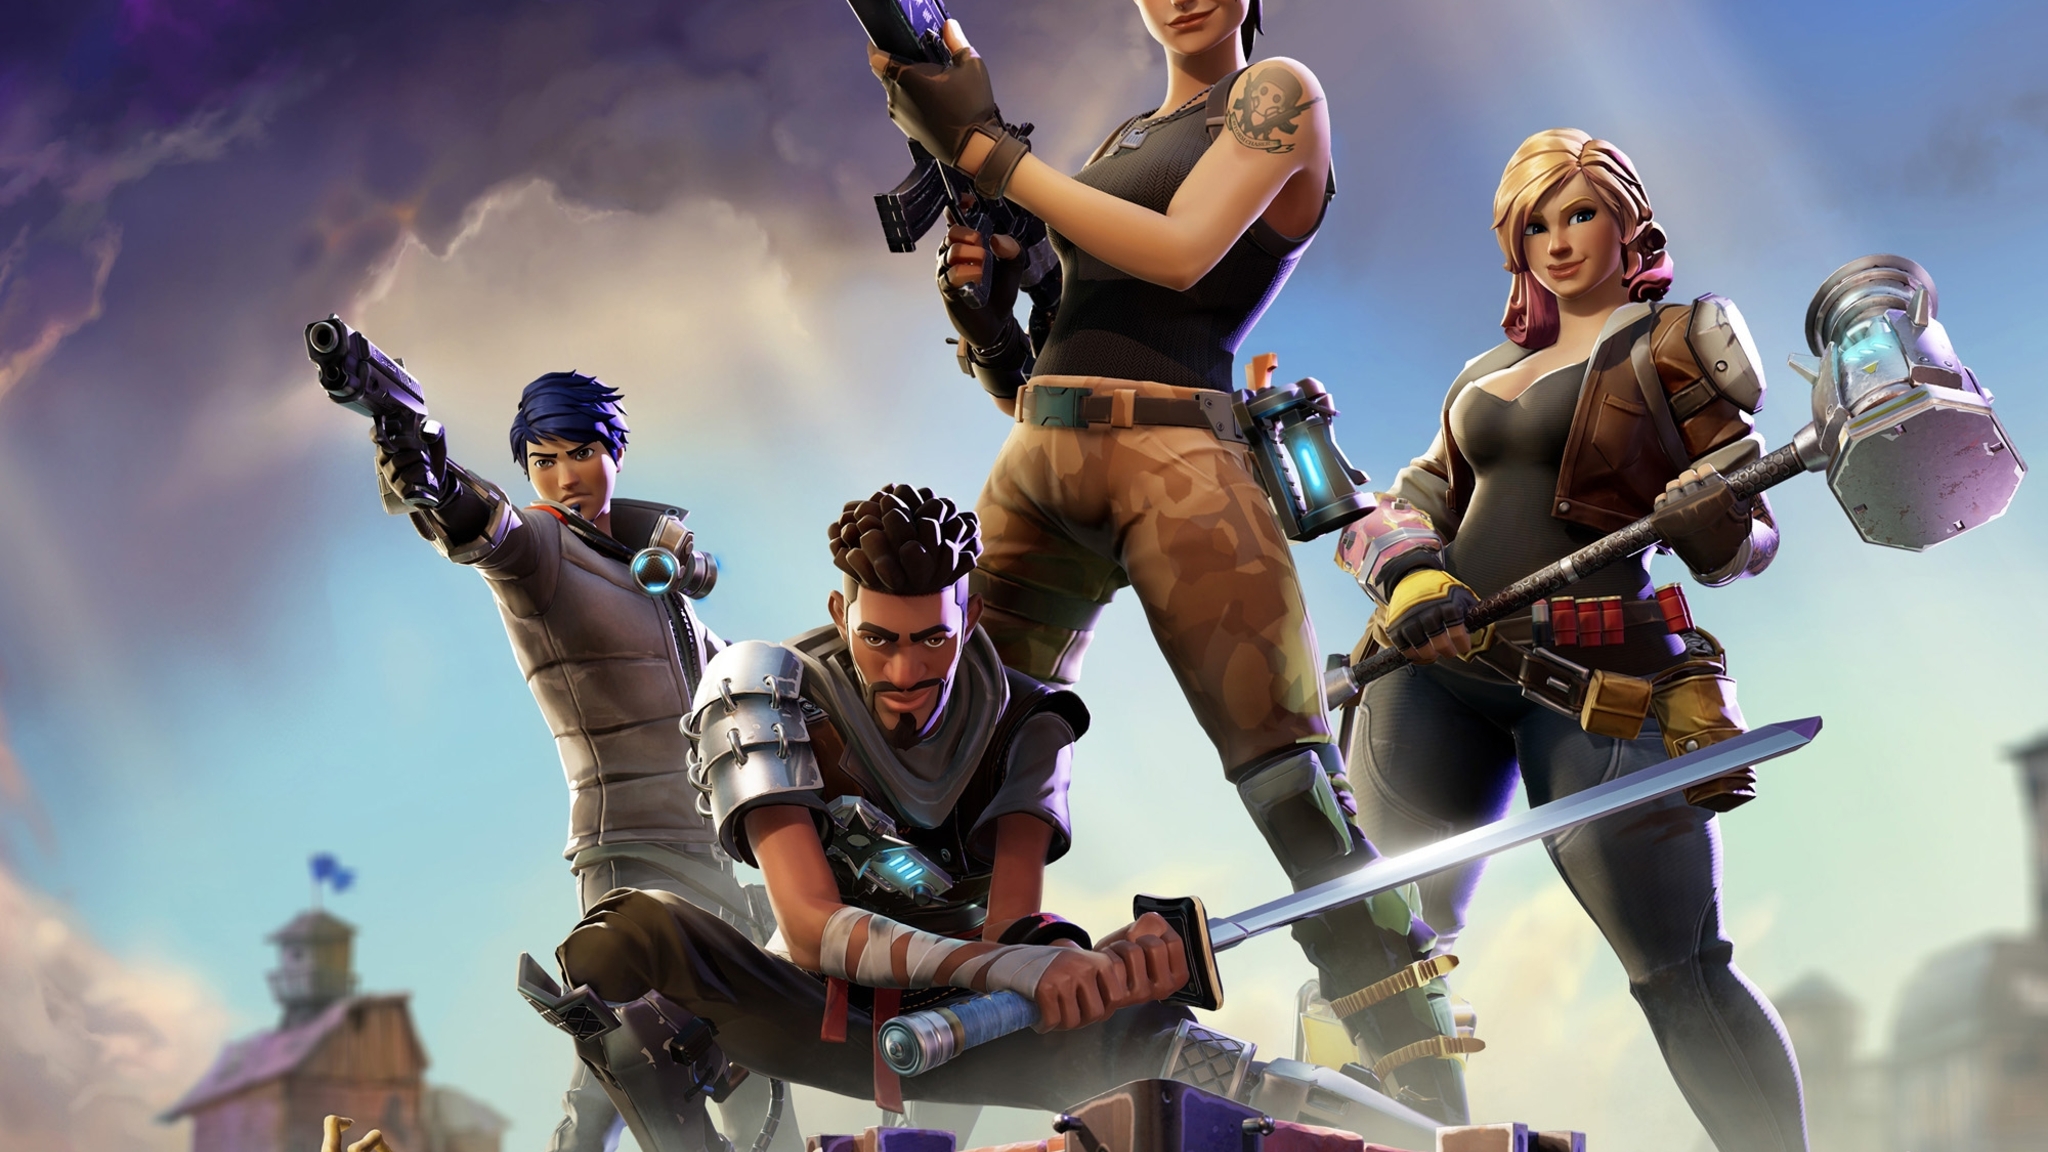 Fortnite Images 2048 Pixels Wide And 1152 Pixels Tall How To Get